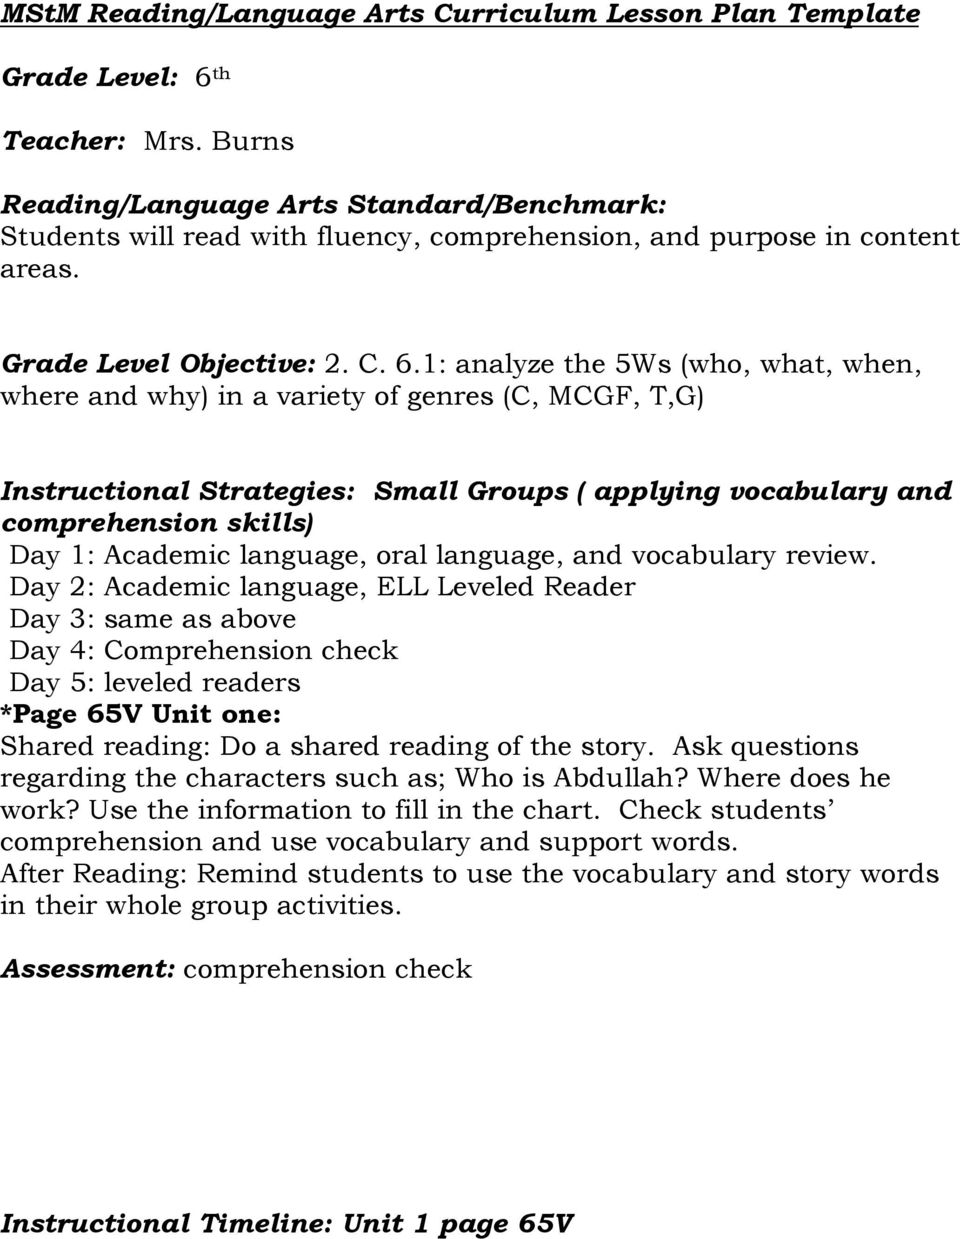 1: analyze the 5Ws (who, what, when, where and why) in a variety of genres (C, MCGF, T,G) Small Groups ( applying vocabulary and comprehension skills) Day 1: Academic language, oral language, and